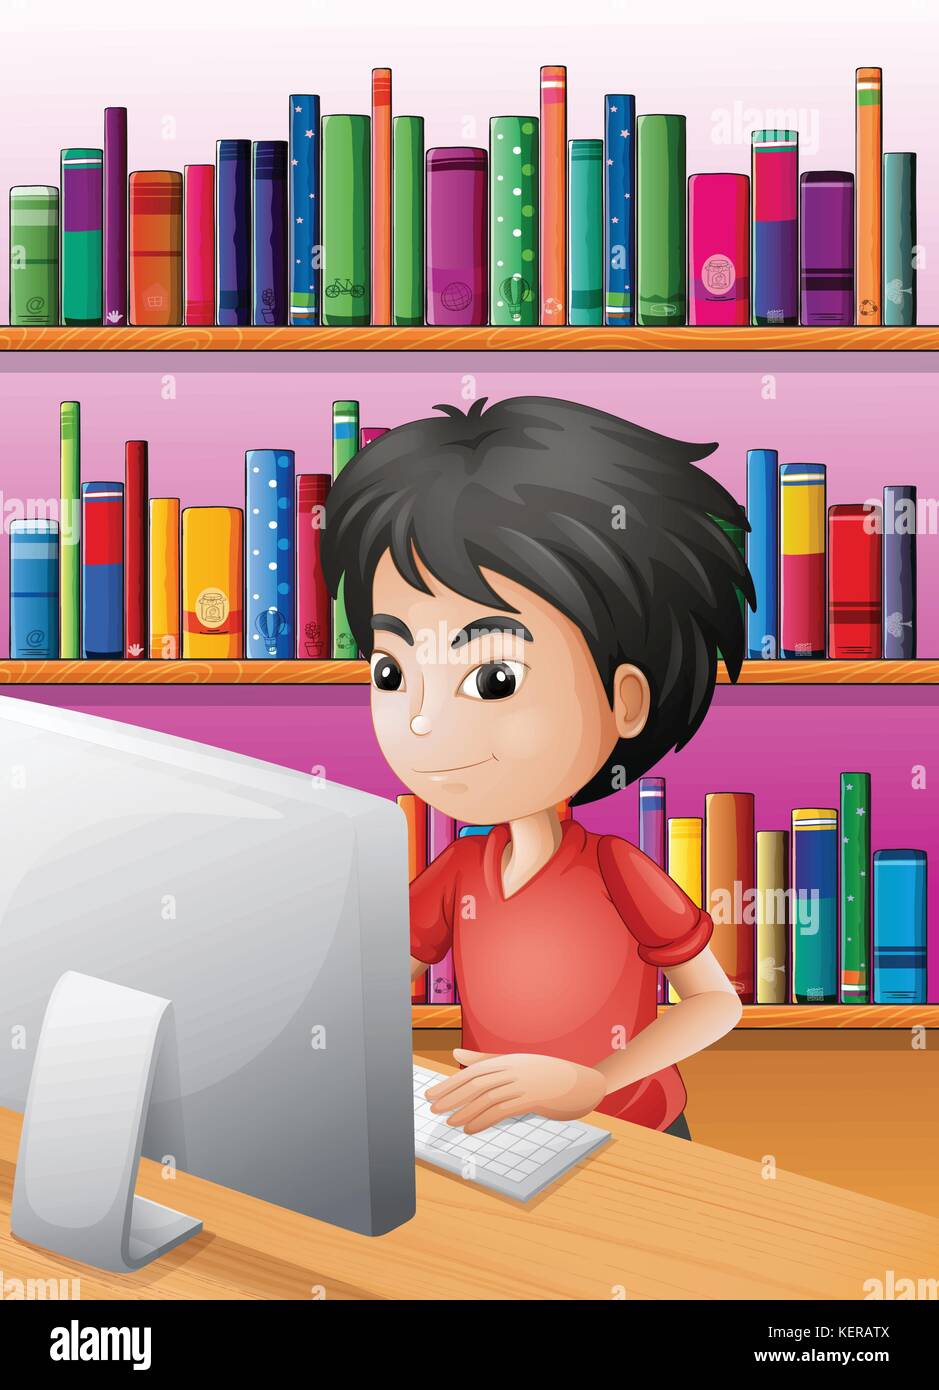 Illustration of a boy playing computer in front of the shelves with books Stock Vector